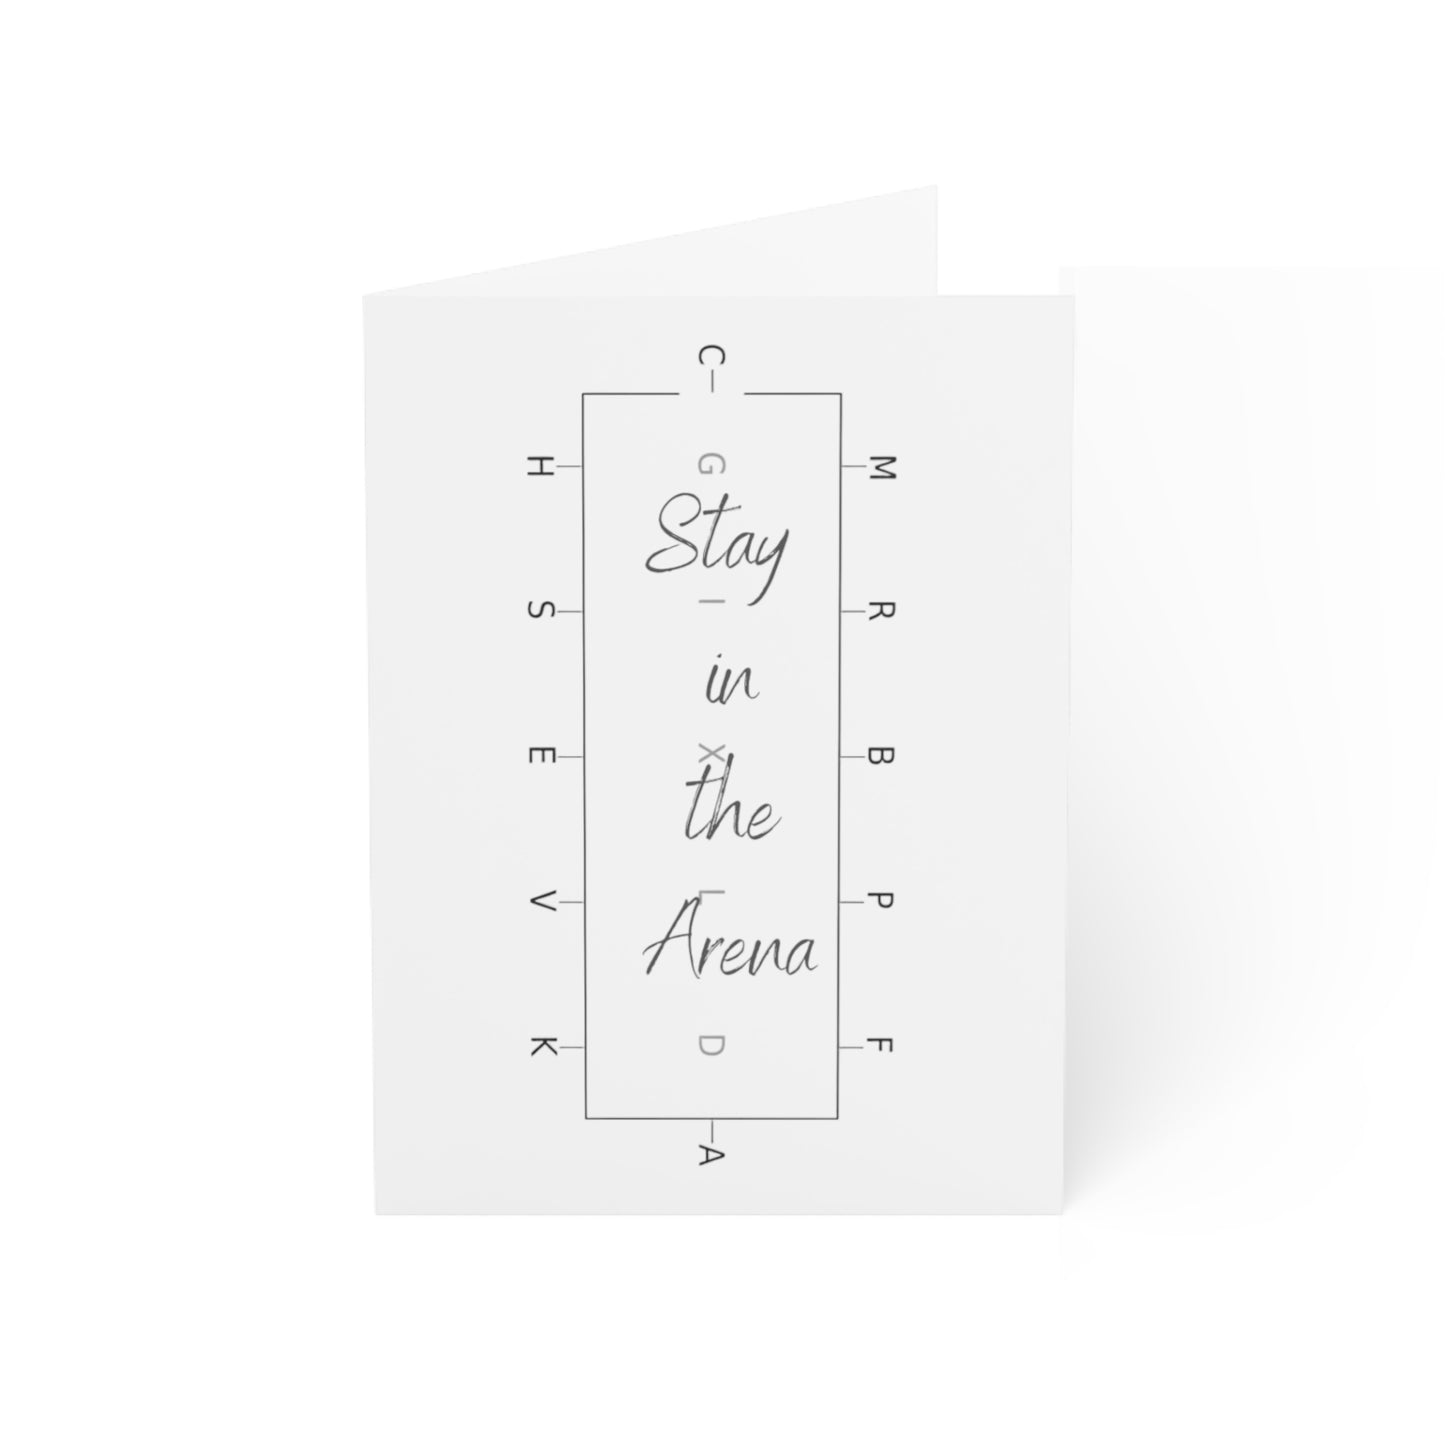 Stay in the Arena Greeting Cards (1, 10, 30, and 50pcs)